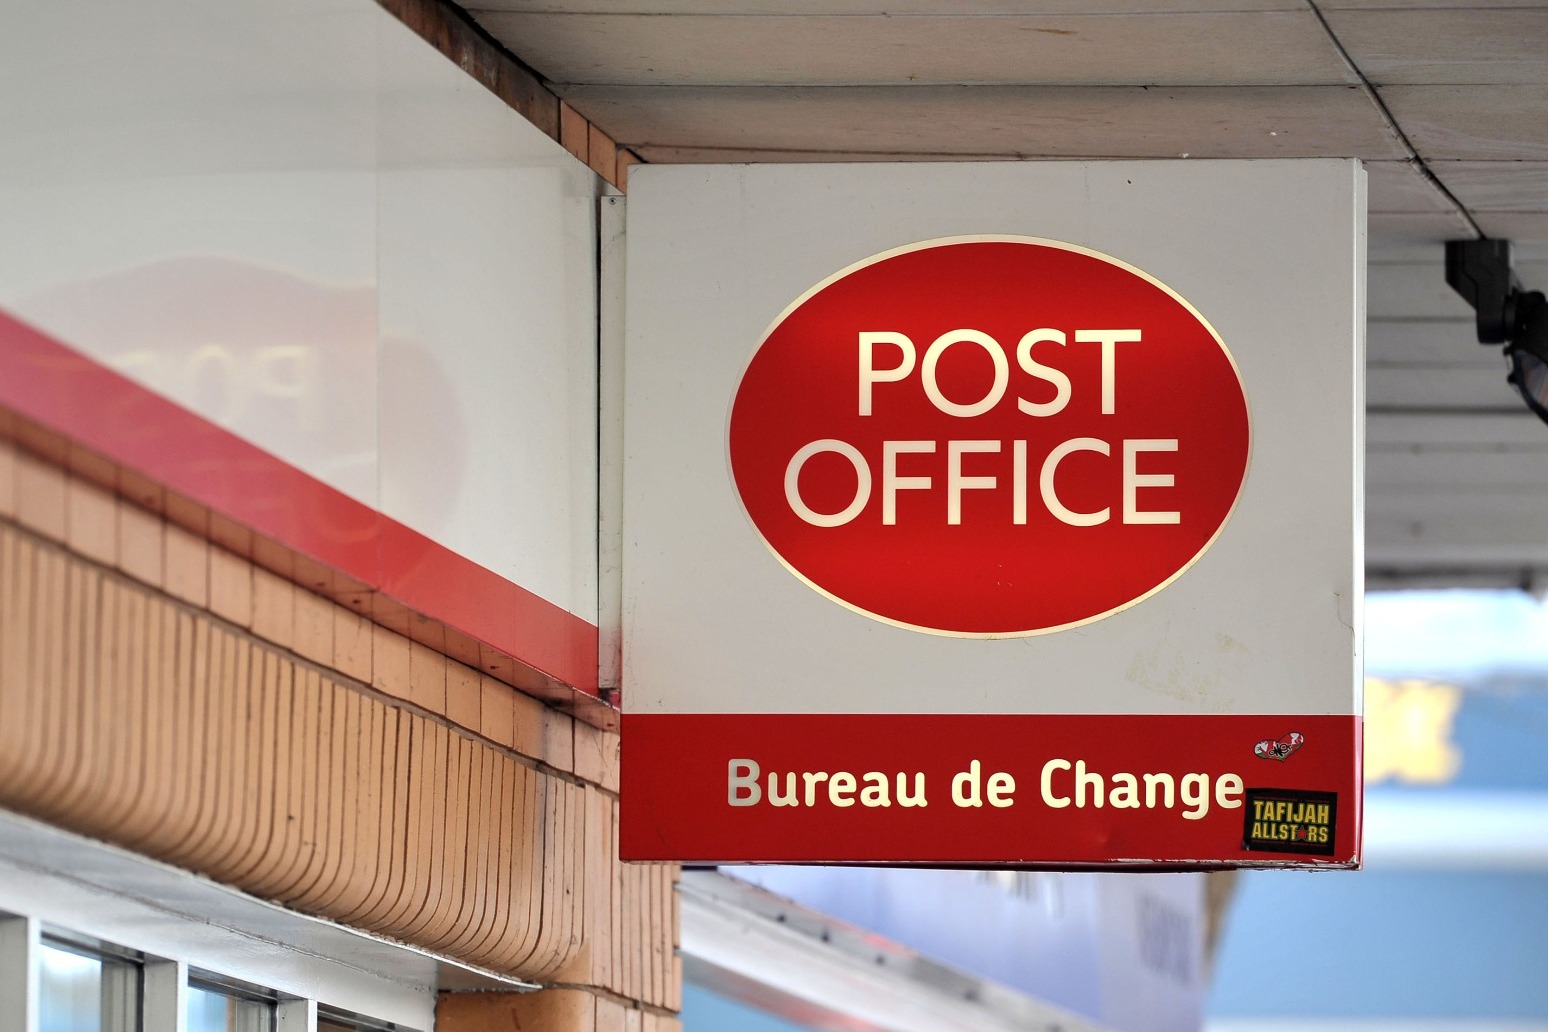 Record £3.23bn in cash handled by post offices in May 